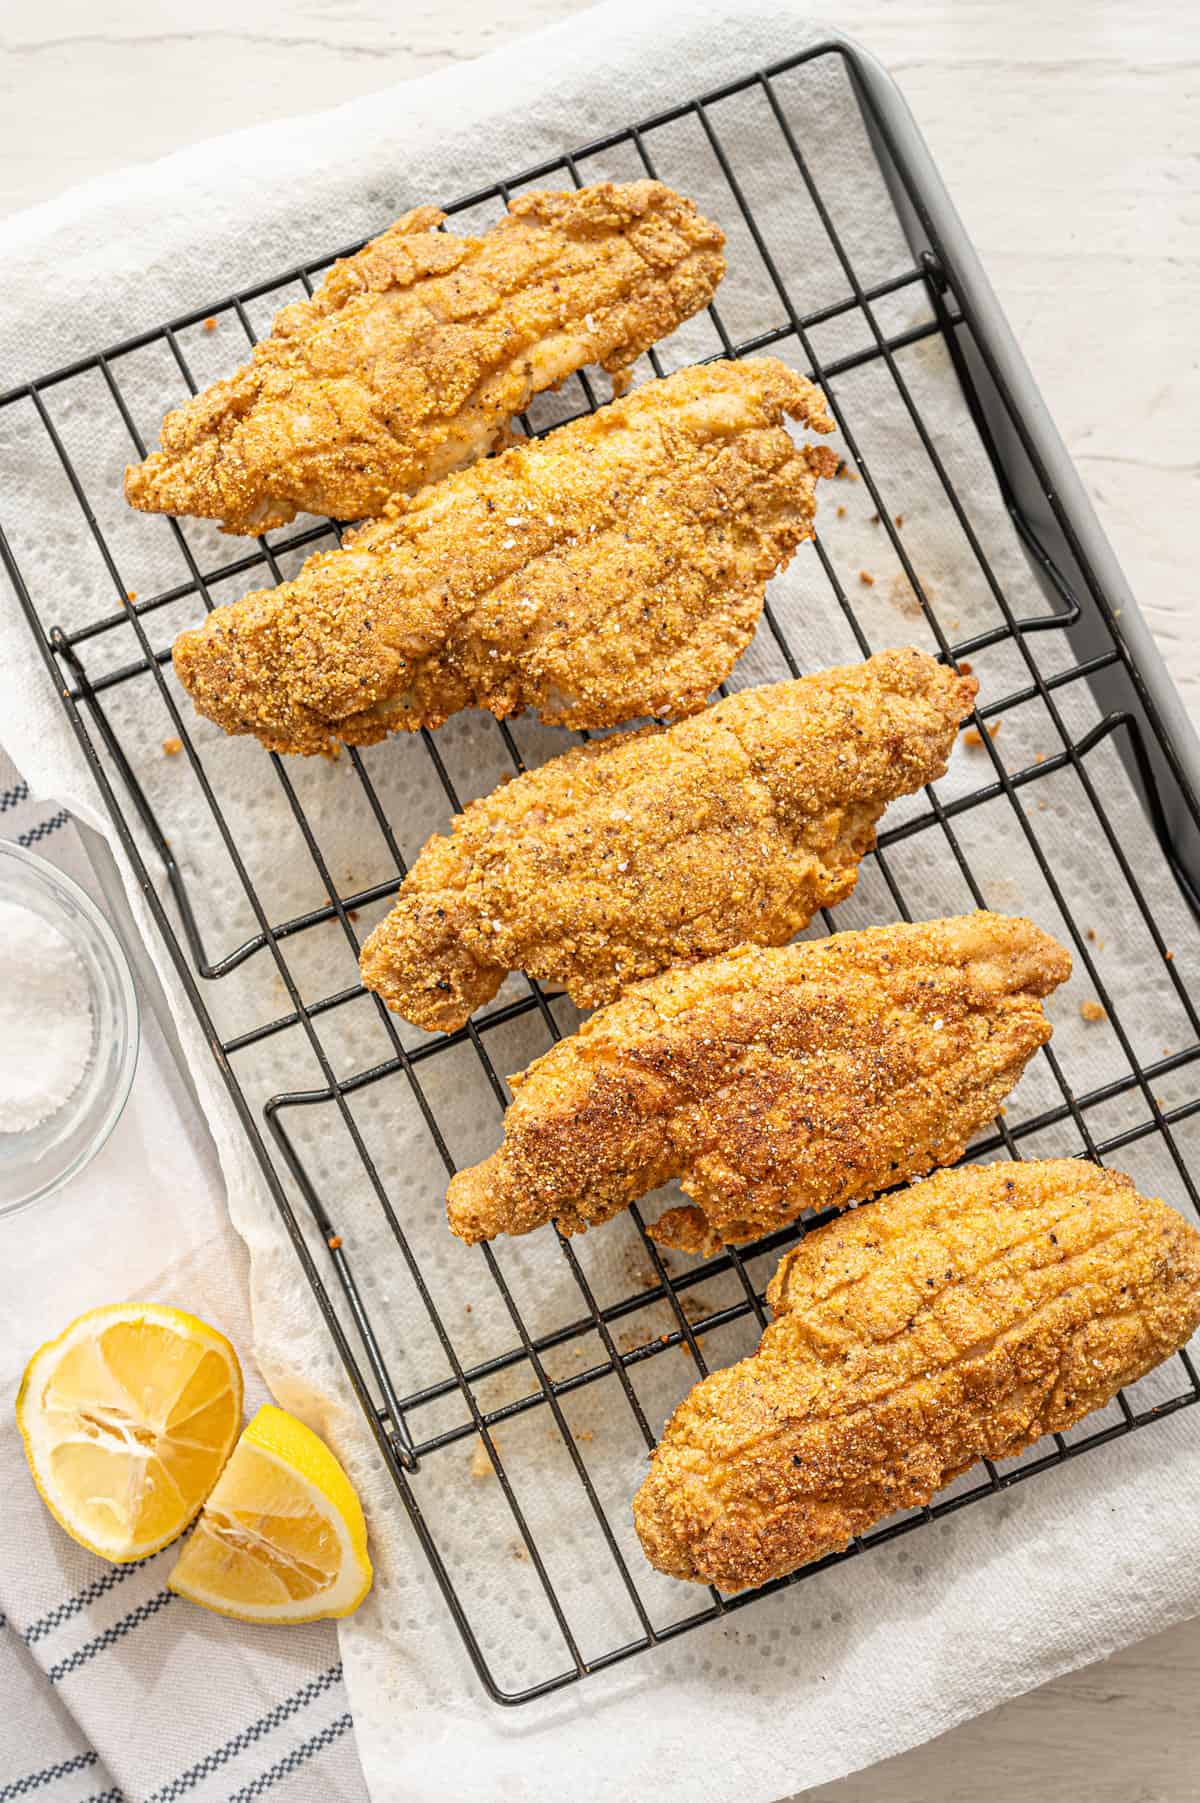 Fried catfish on a wire rack.